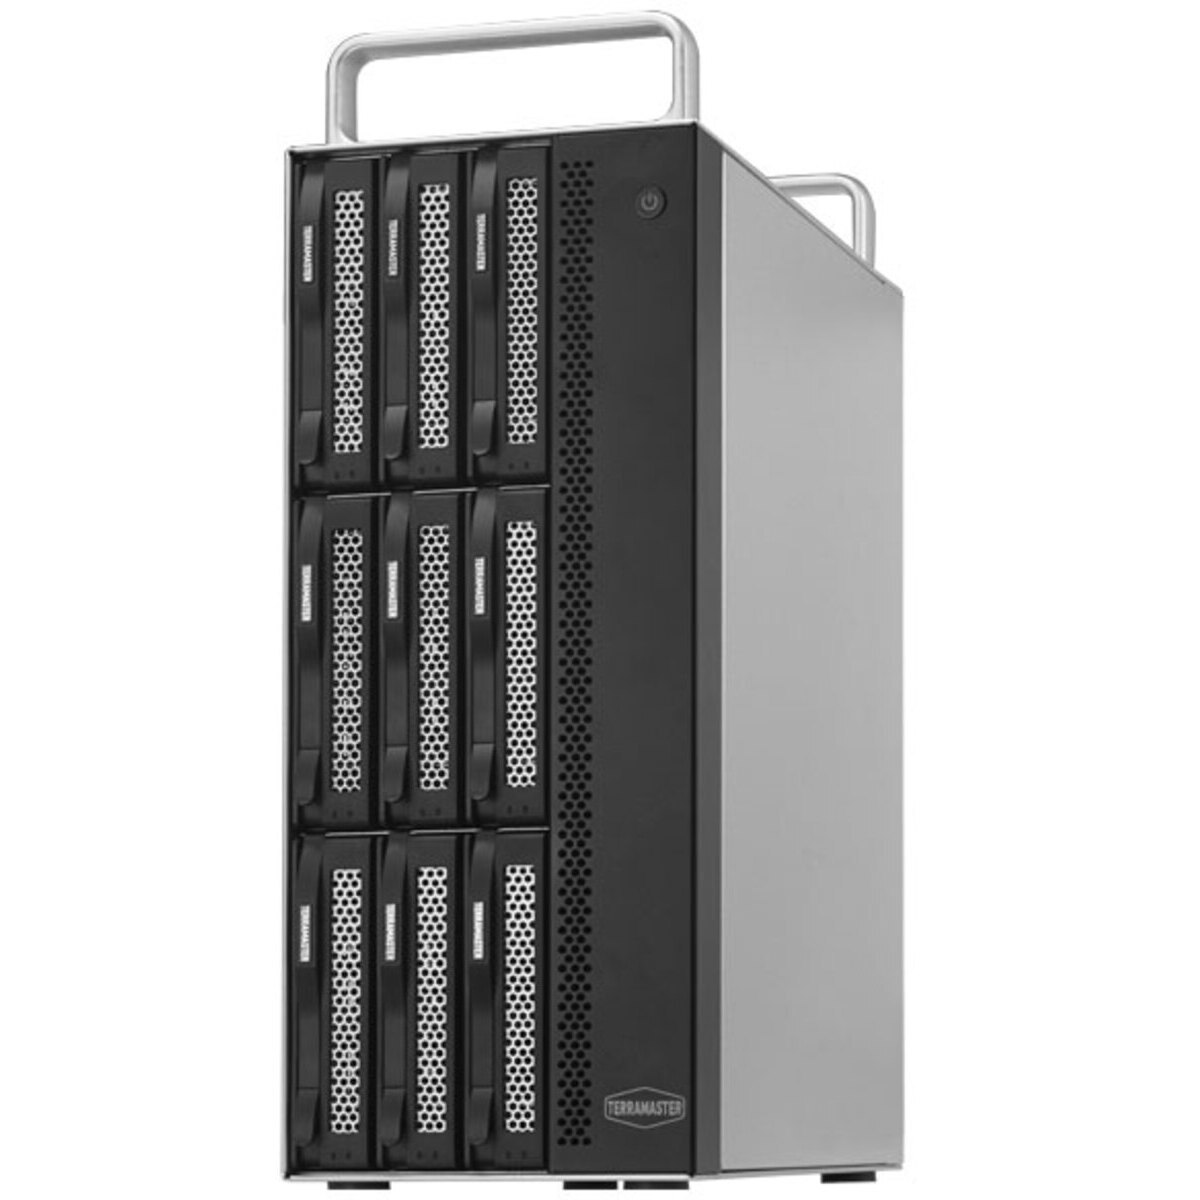 TerraMaster D8-322 8tb 8-Bay Desktop Multimedia / Power User / Business DAS - Direct Attached Storage Device 4x2tb Seagate IronWolf Pro ST2000NT001 3.5 7200rpm SATA 6Gb/s HDD NAS Class Drives Installed - Burn-In Tested D8-322